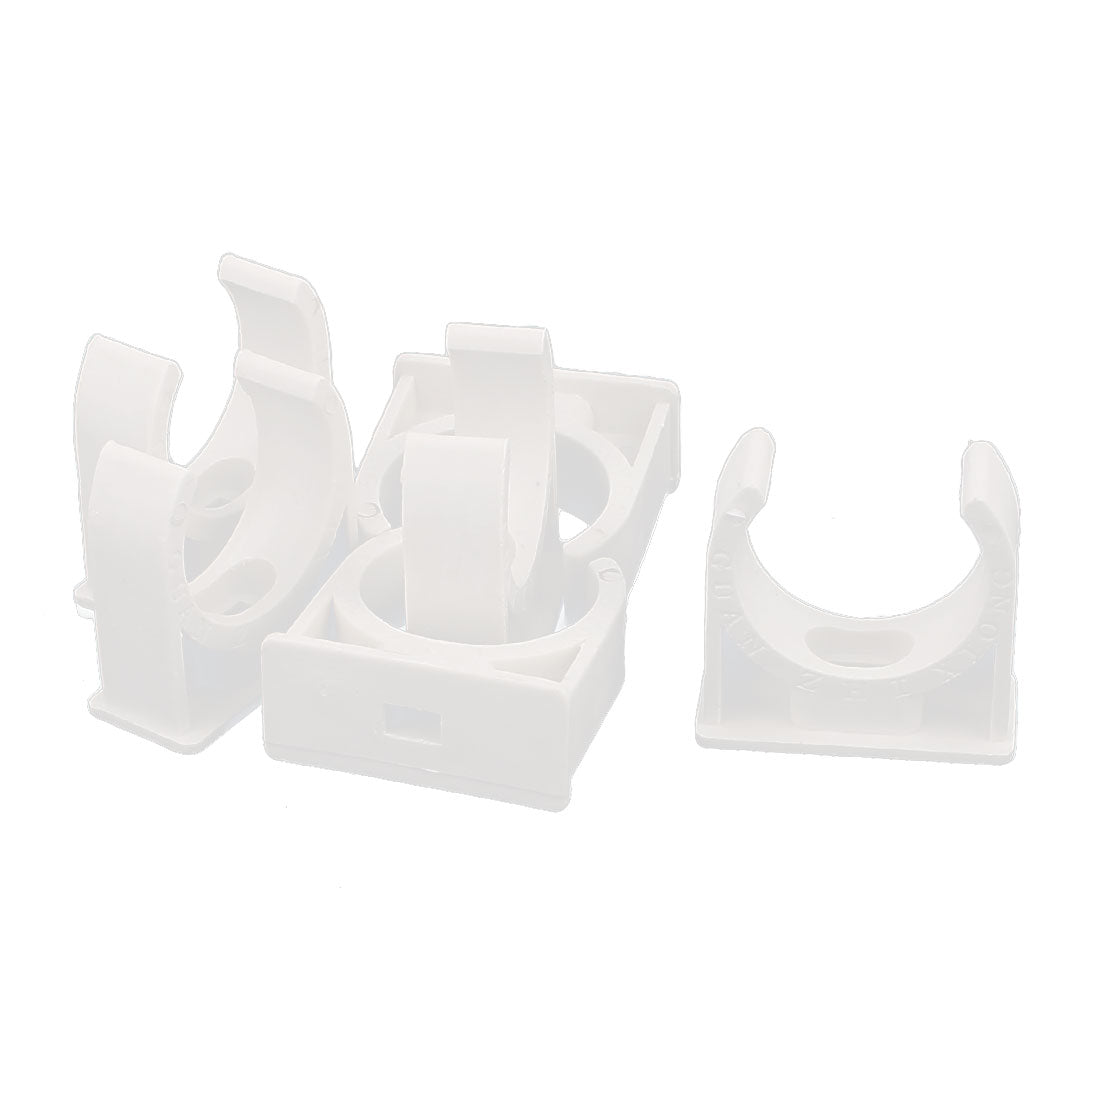 uxcell Uxcell 6 Pcs 30mm Diameter PVC Water Tube Pipe Clamps Clips Connectors White